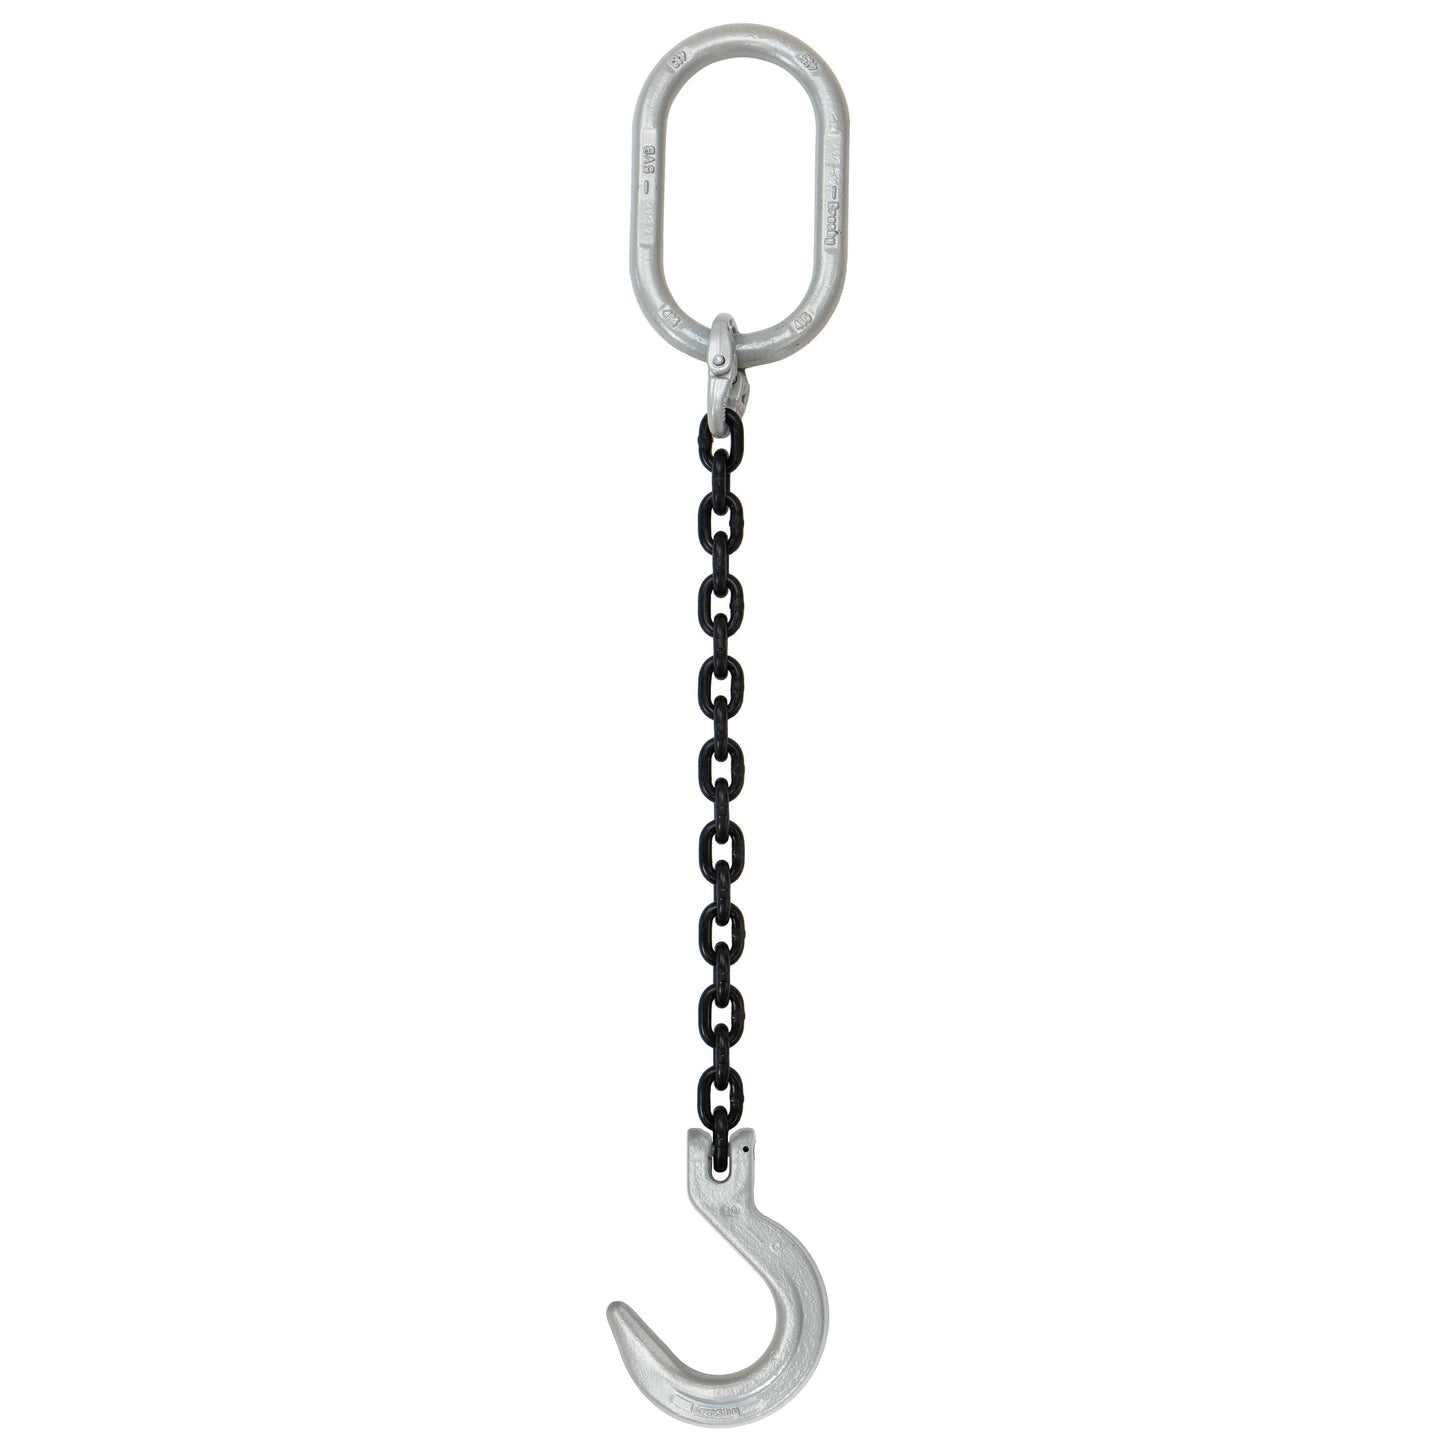 516 inch x 20 foot Domestic Single Leg Chain Sling w Crosby Foundry Hook Grade 100 image 1 of 2